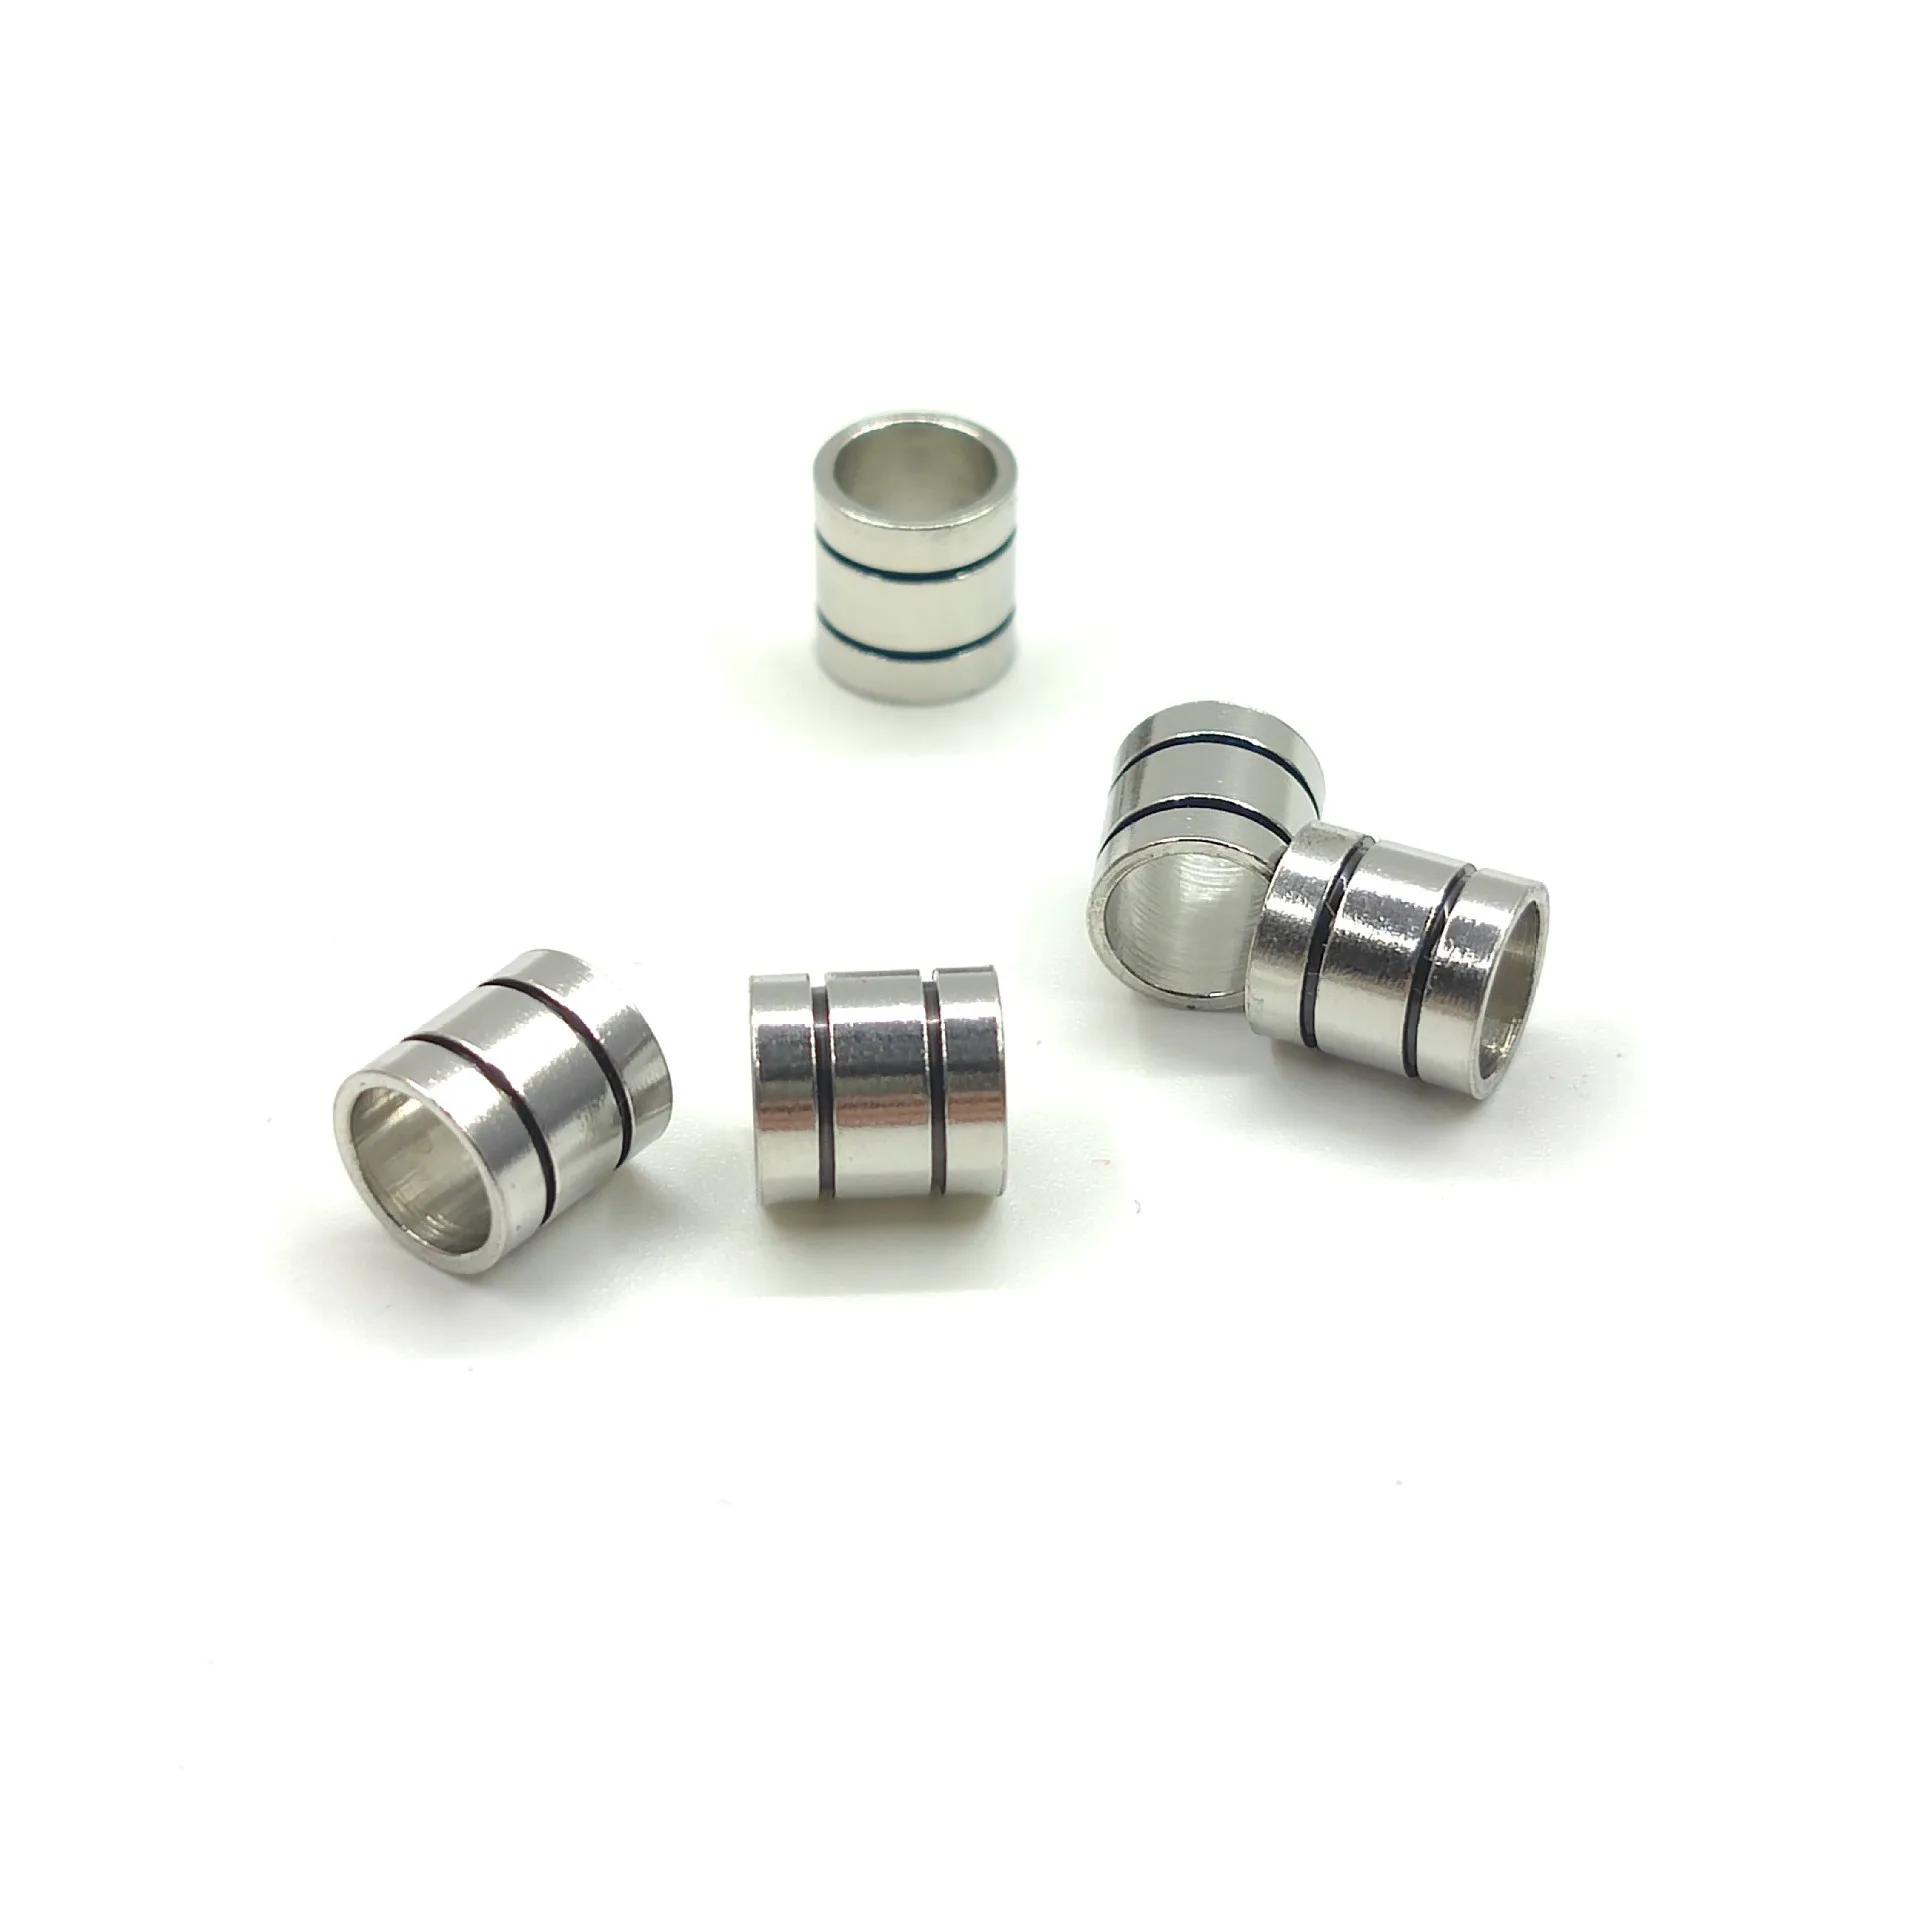 

6mm Large Hole Diy Jewelry Making Stainless Steel Spacer Beads Grooved Column Beads Tube Spacers Loose Charm Beads